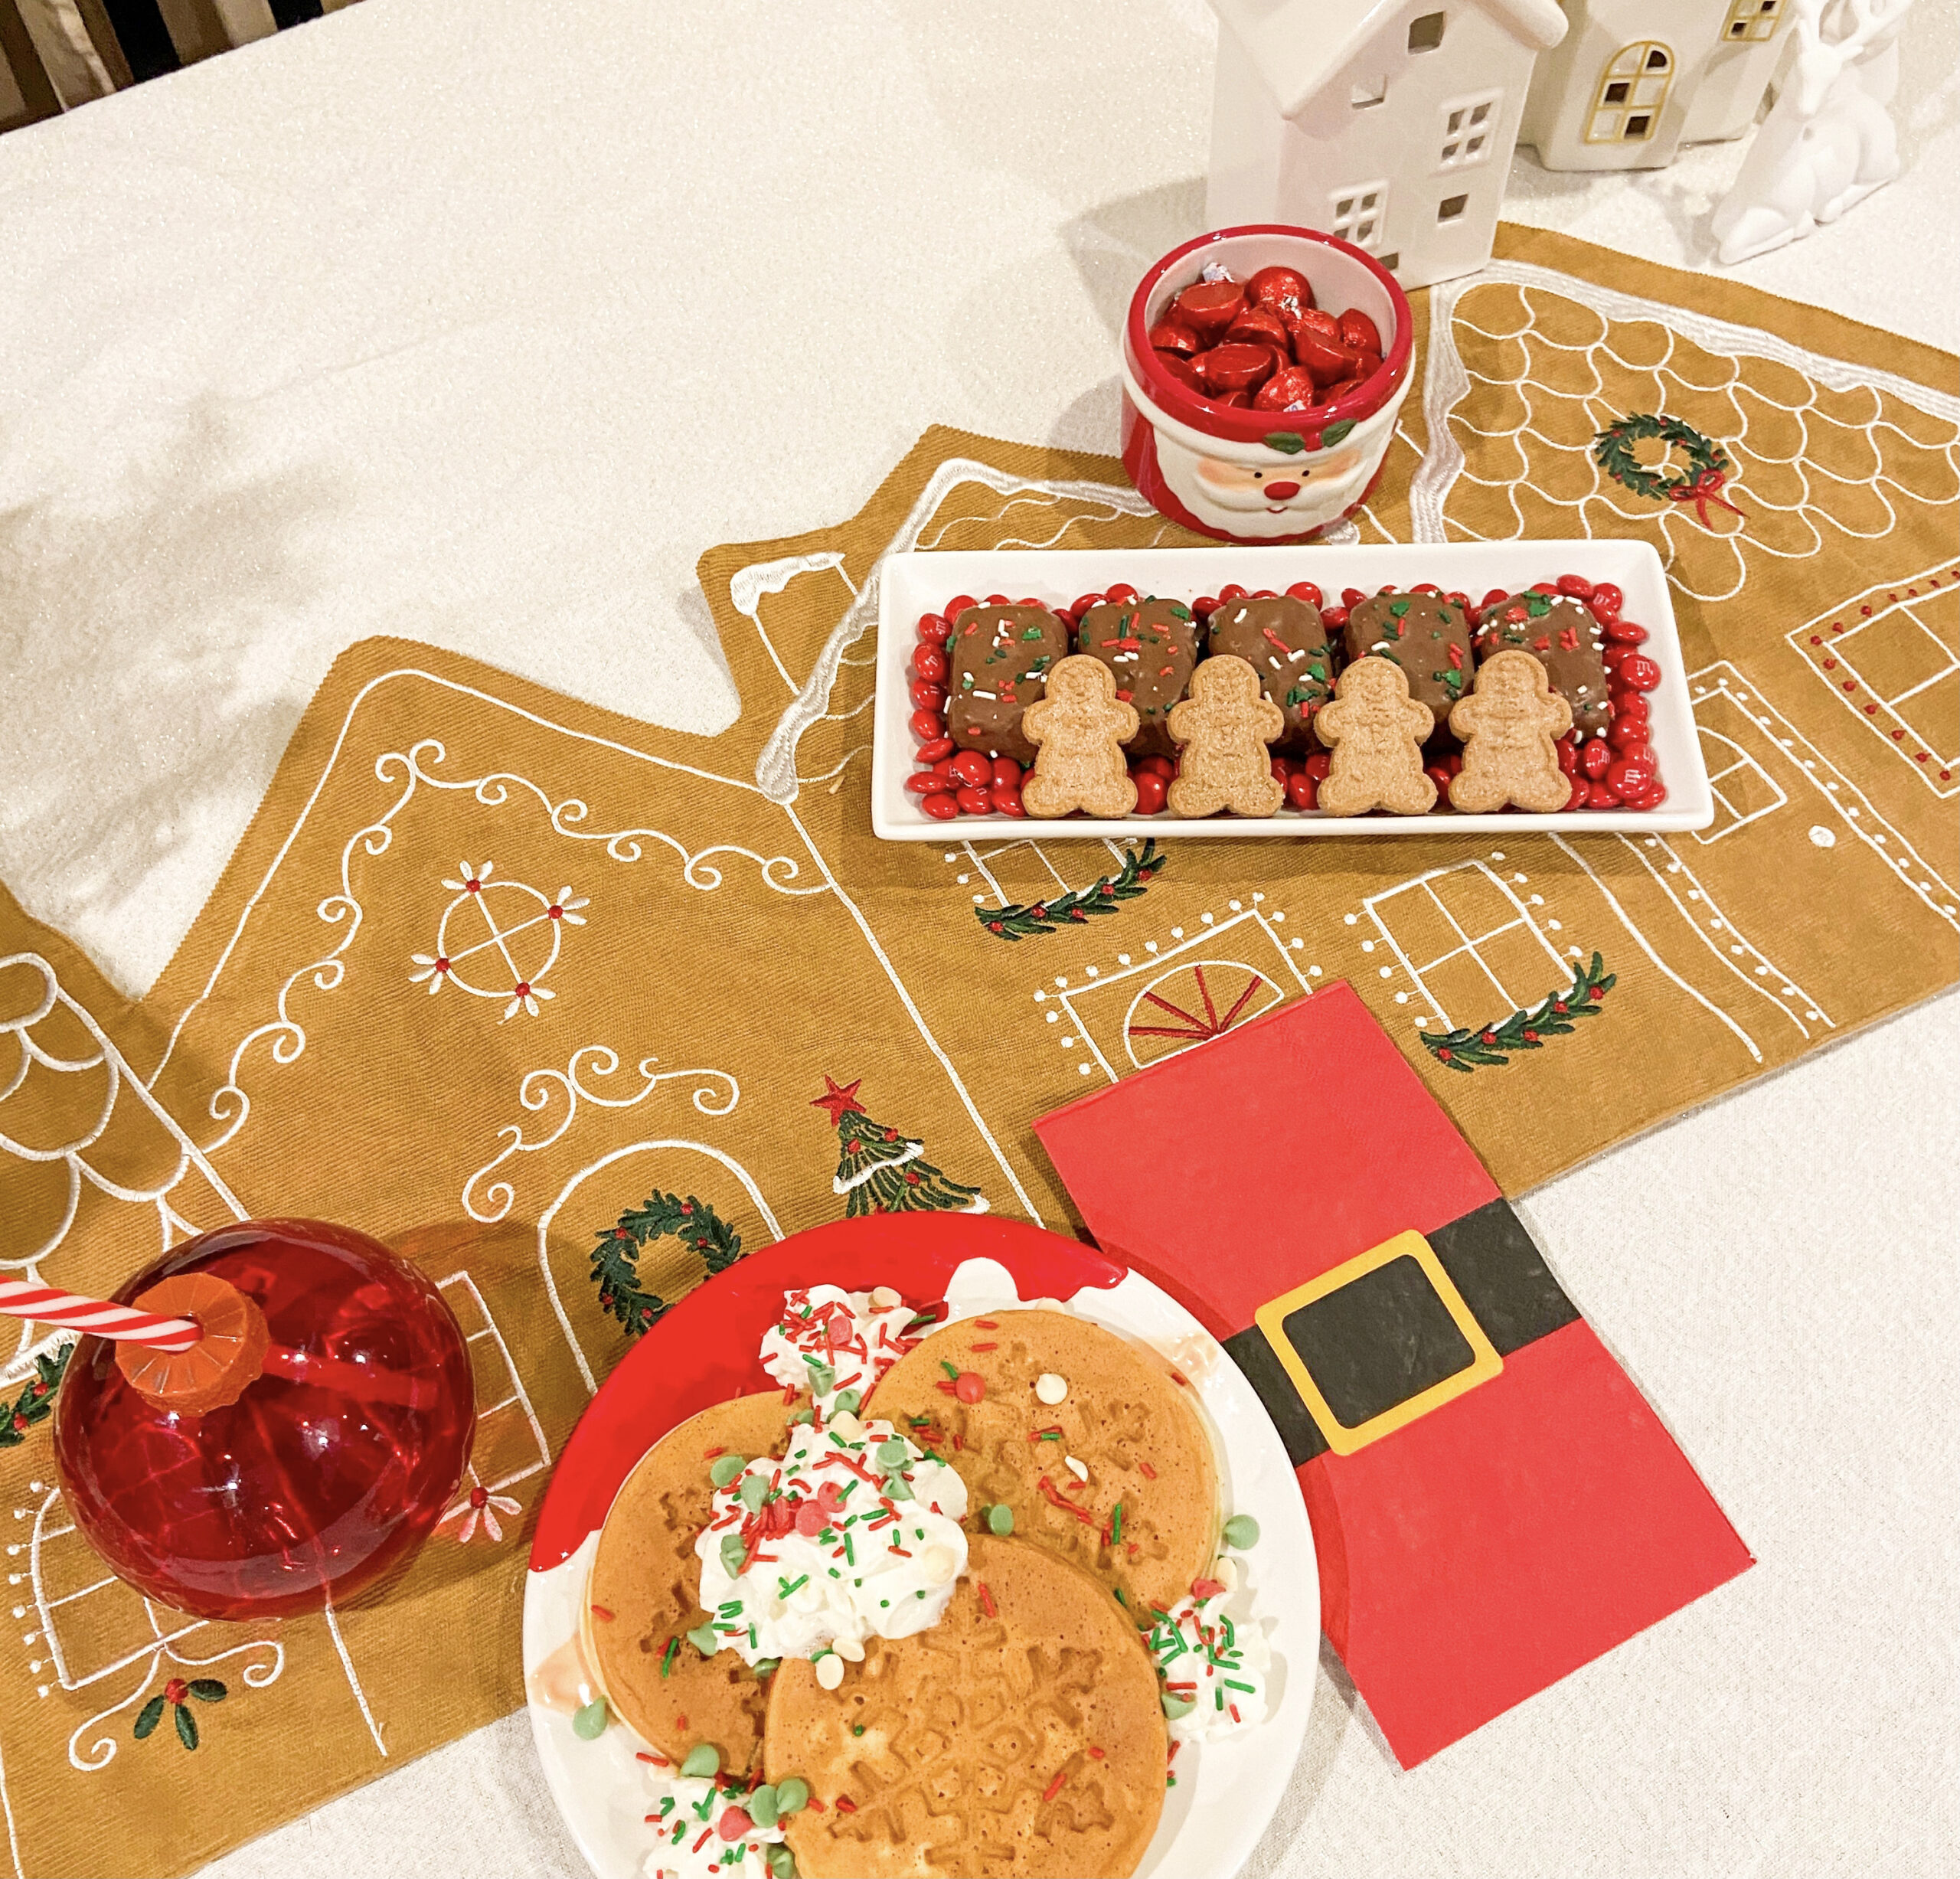 North Pole Breakfast Tablescape with Festive Waffles